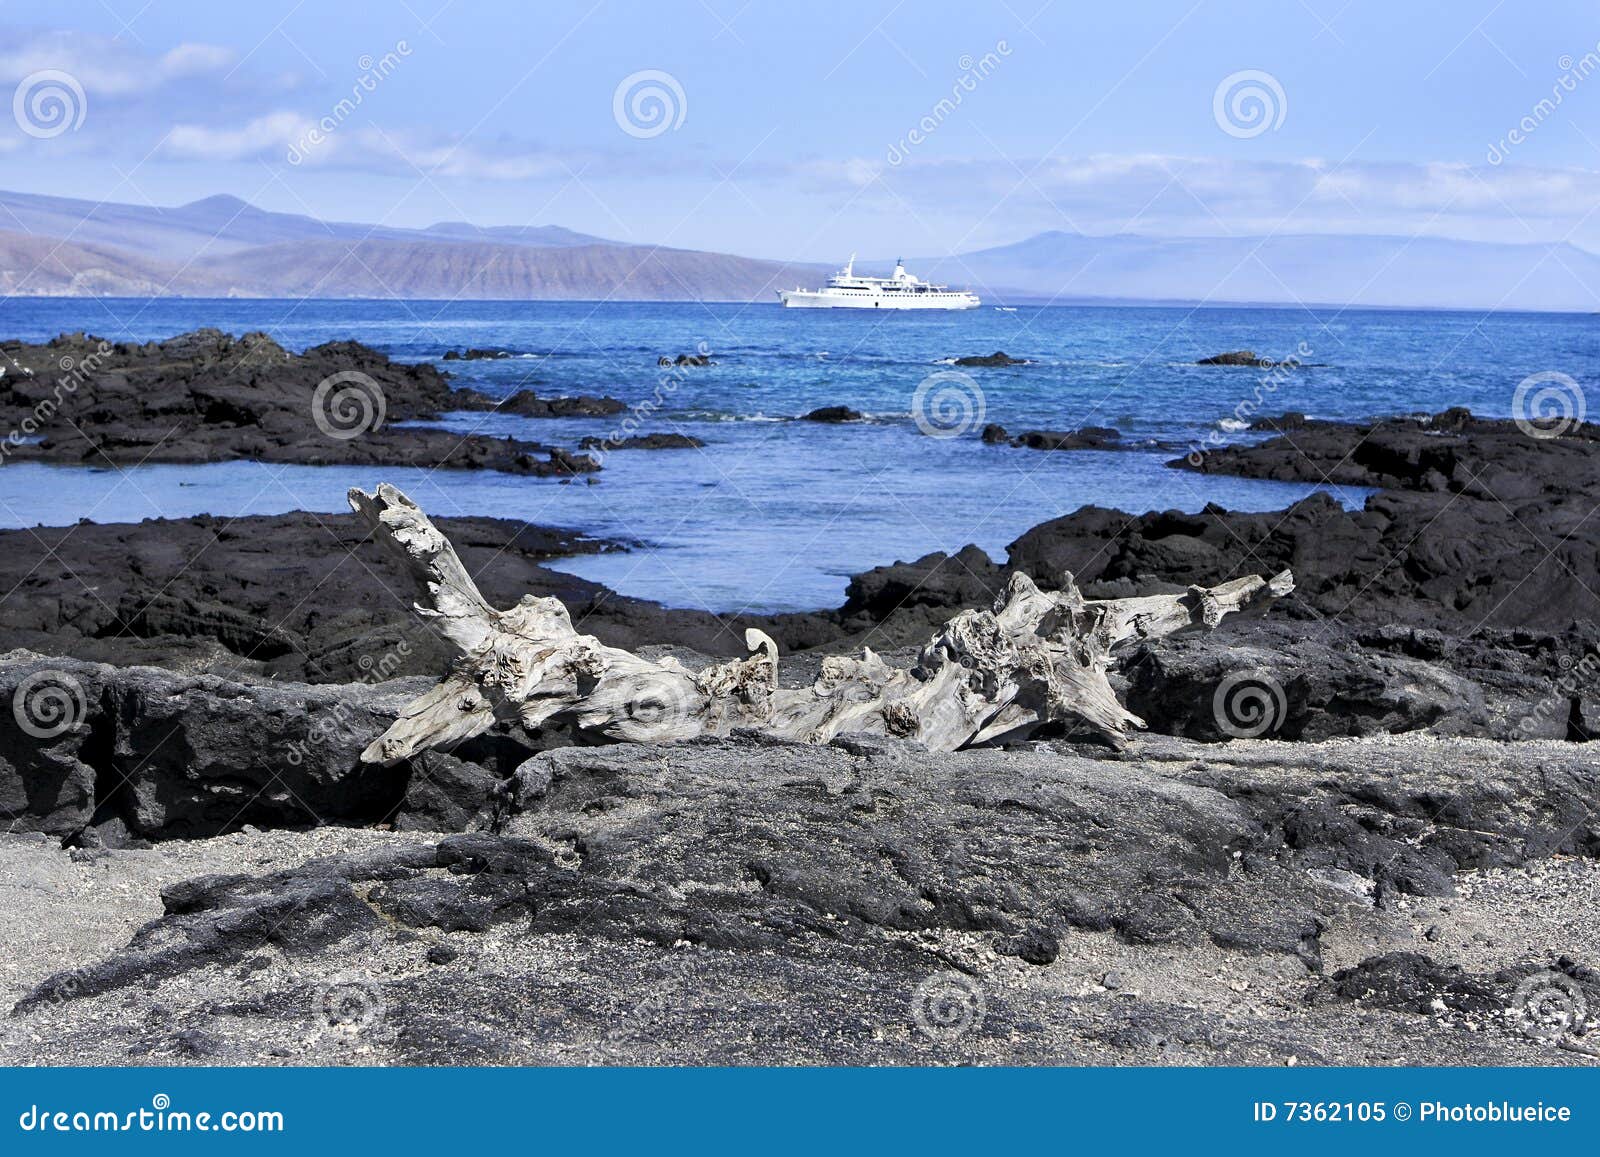 landscape of the galapagos islands